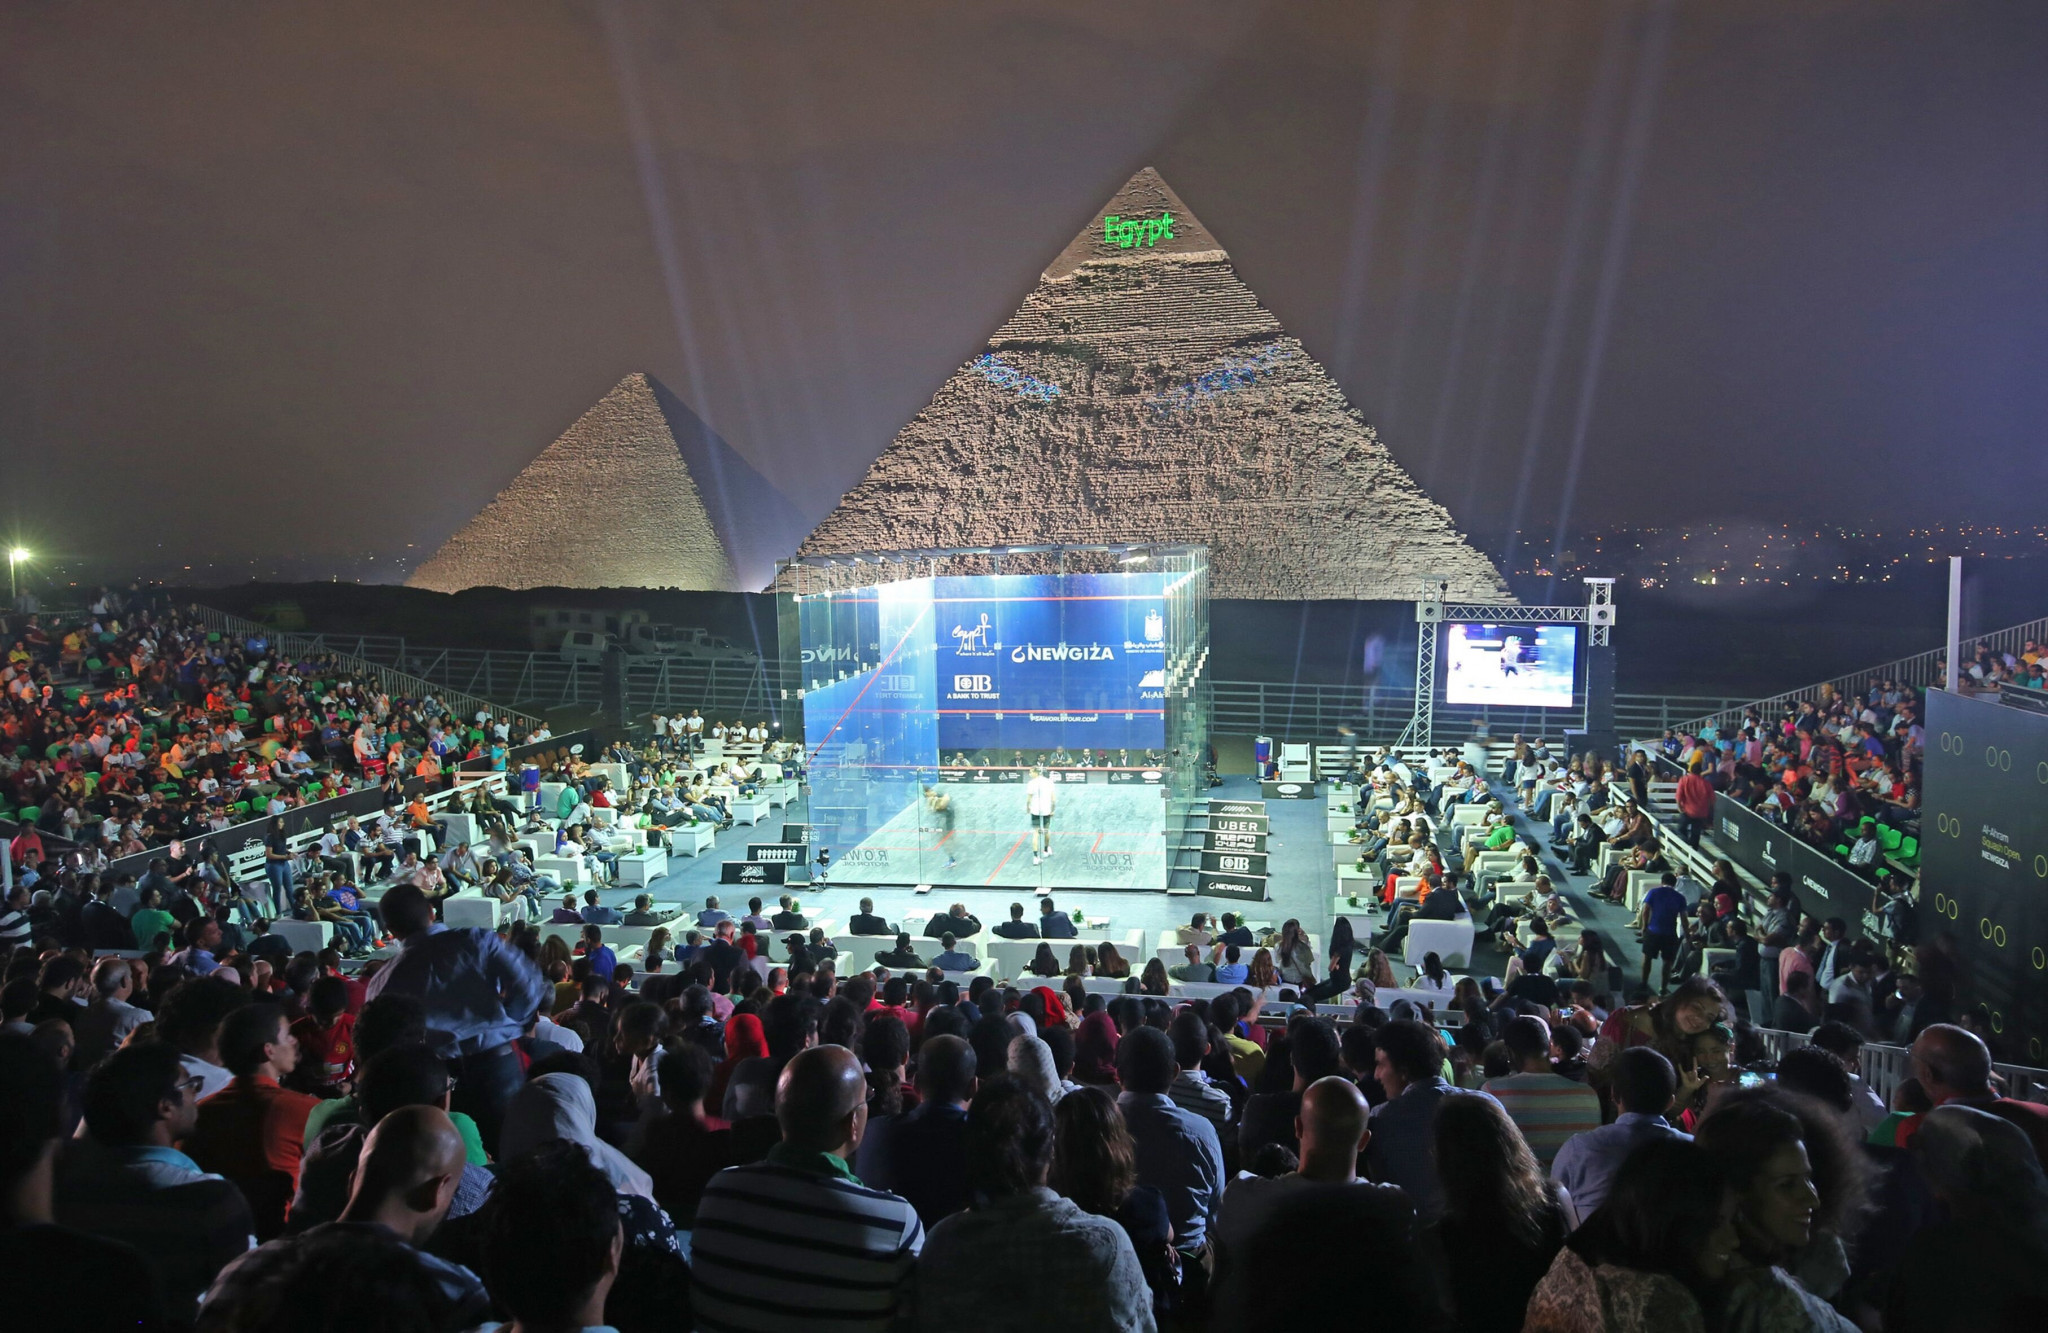 PSA Women's World Championship to take place in front of Great Pyramid of Giza